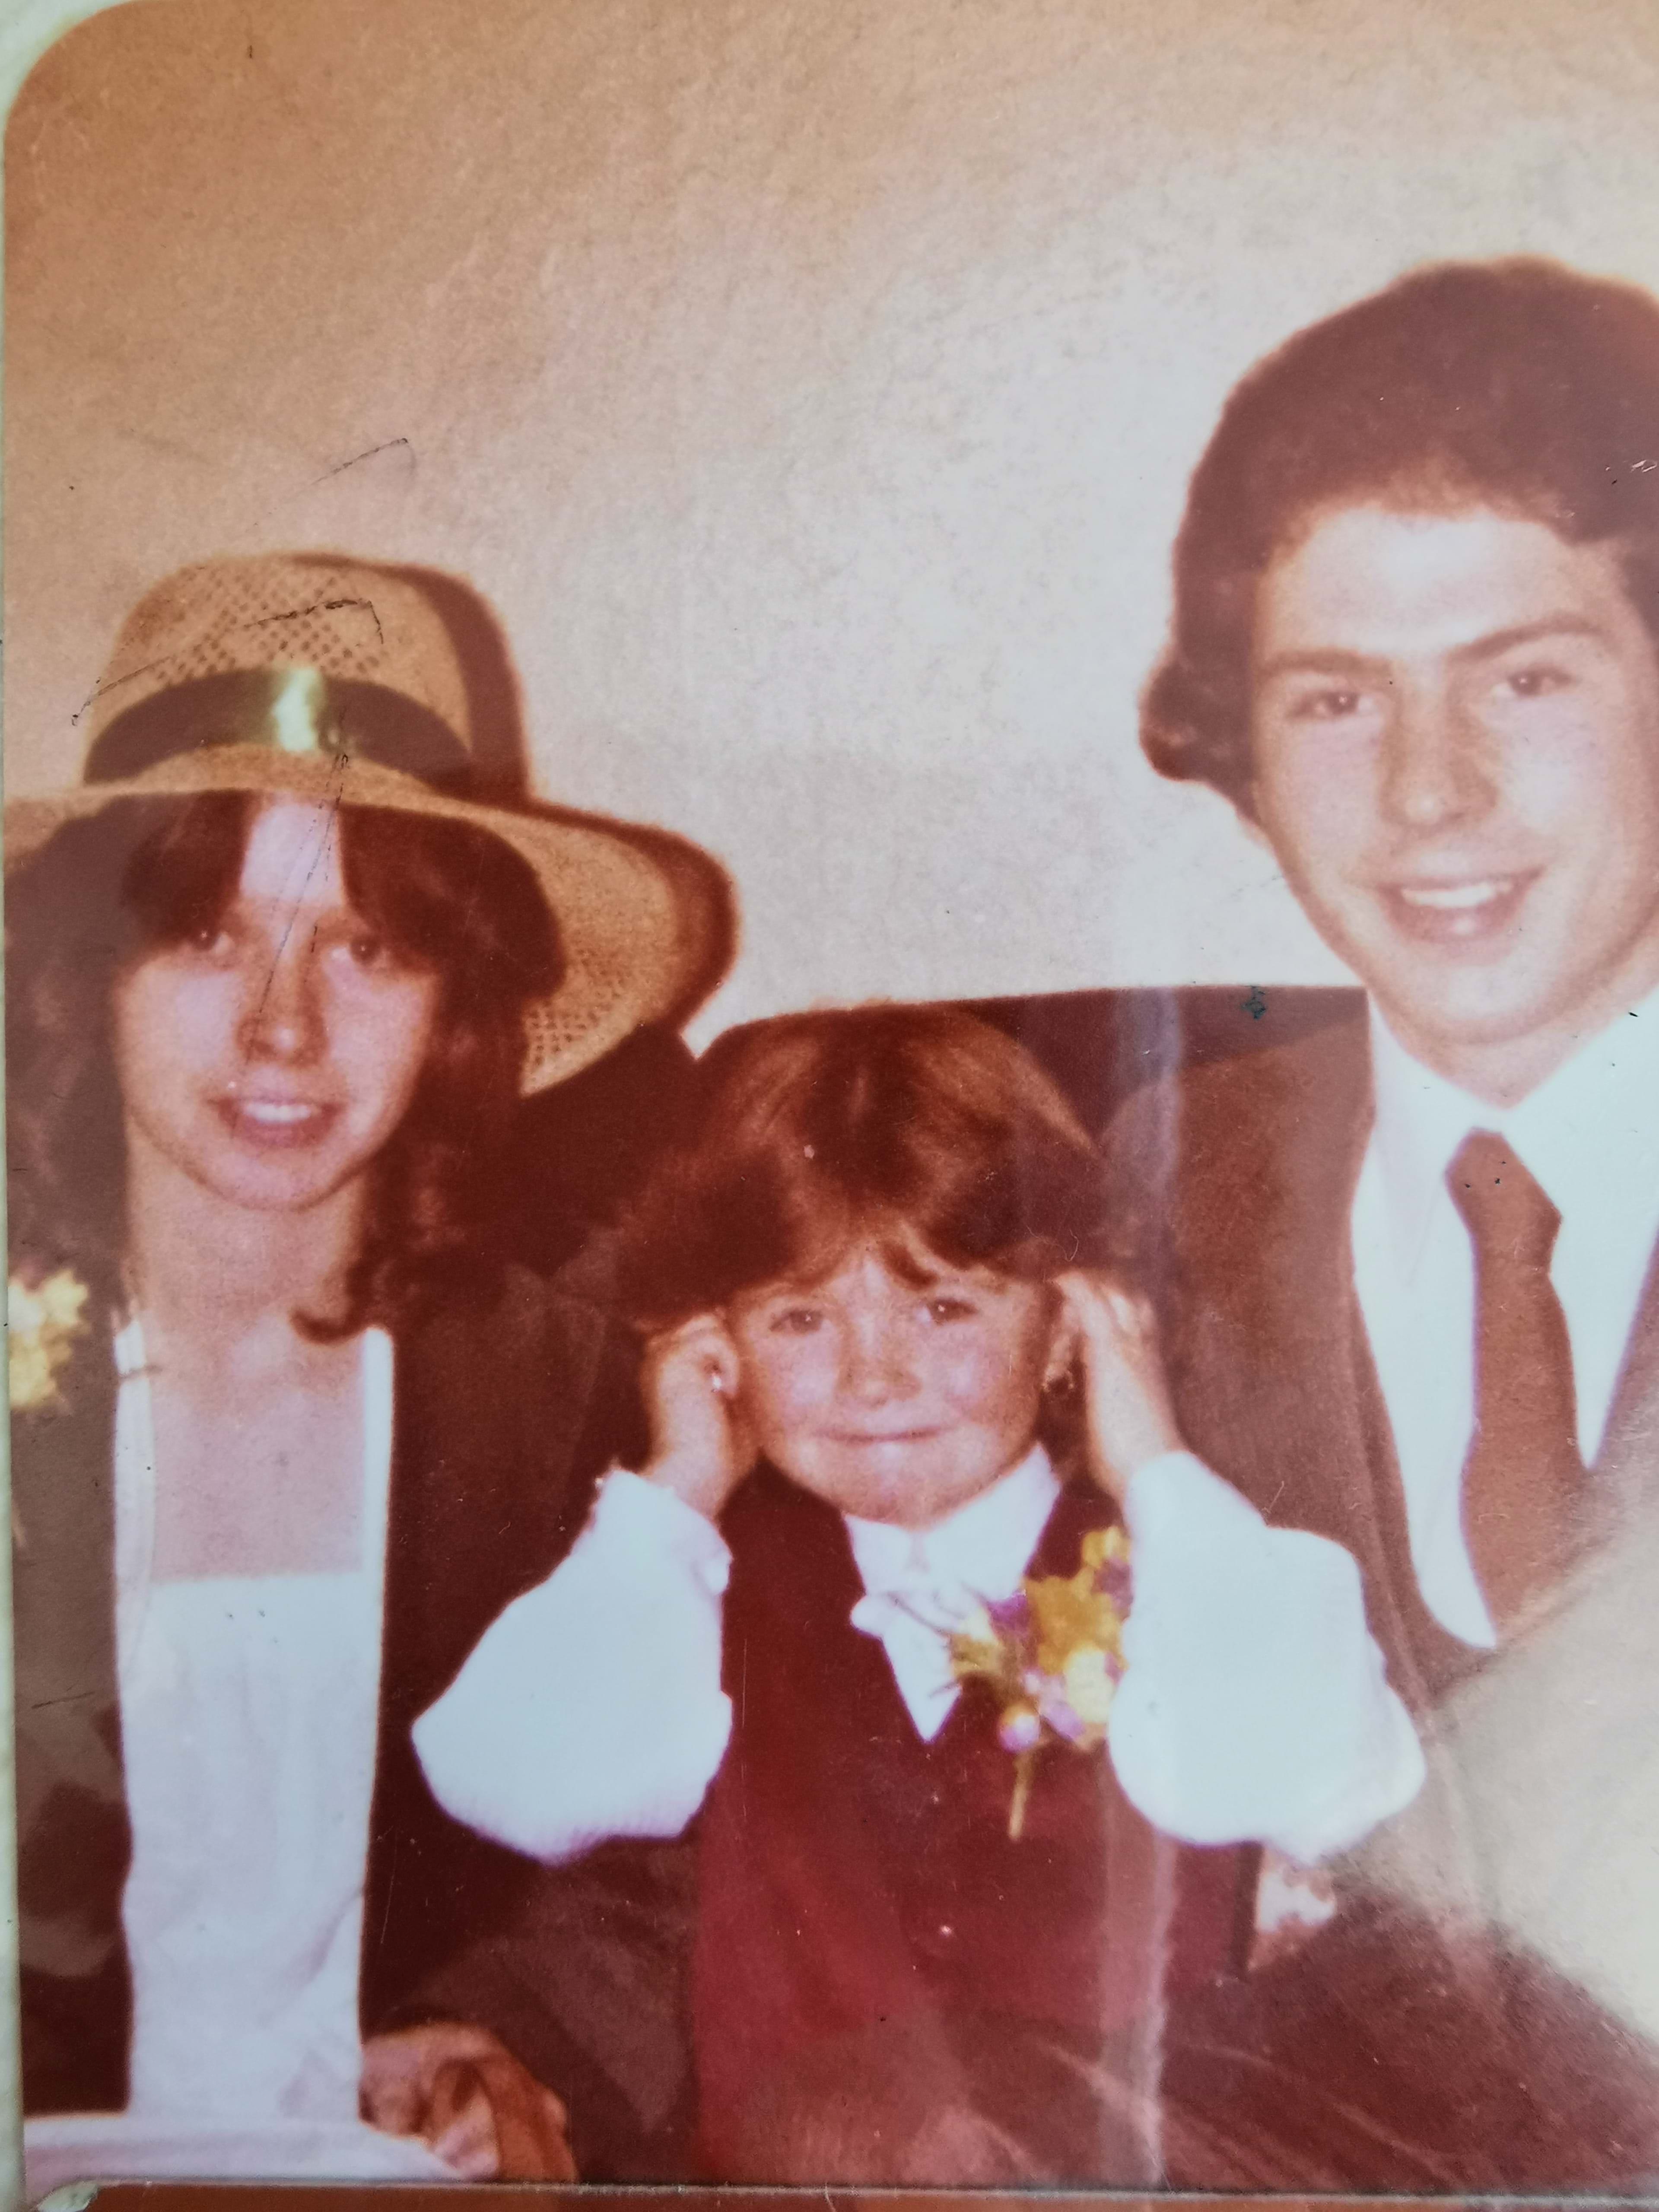 Sharon Walker pictured with her partner, Craig Wallace, and their daughter Sharyn in the late 1970's